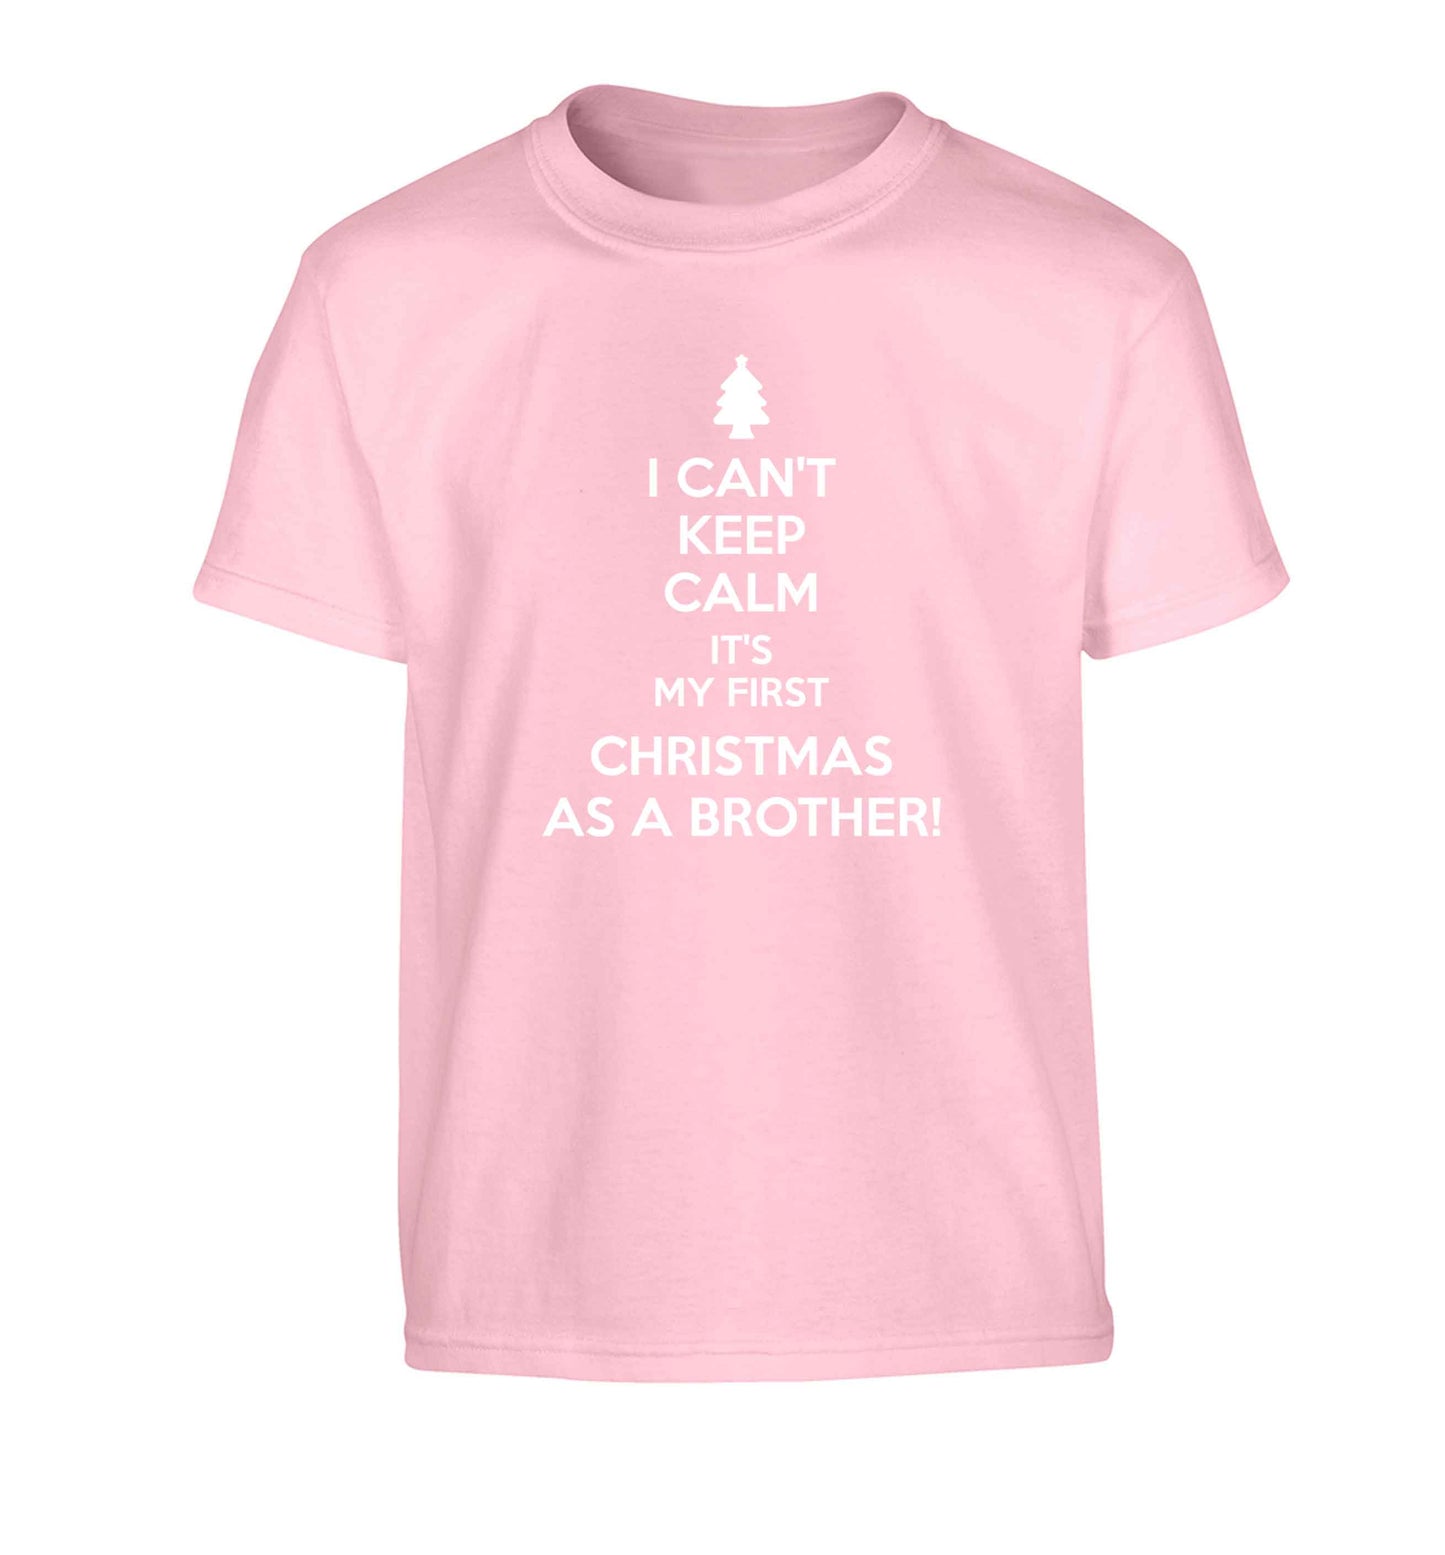 I can't keep calm it's my first Christmas as a brother! Children's light pink Tshirt 12-13 Years